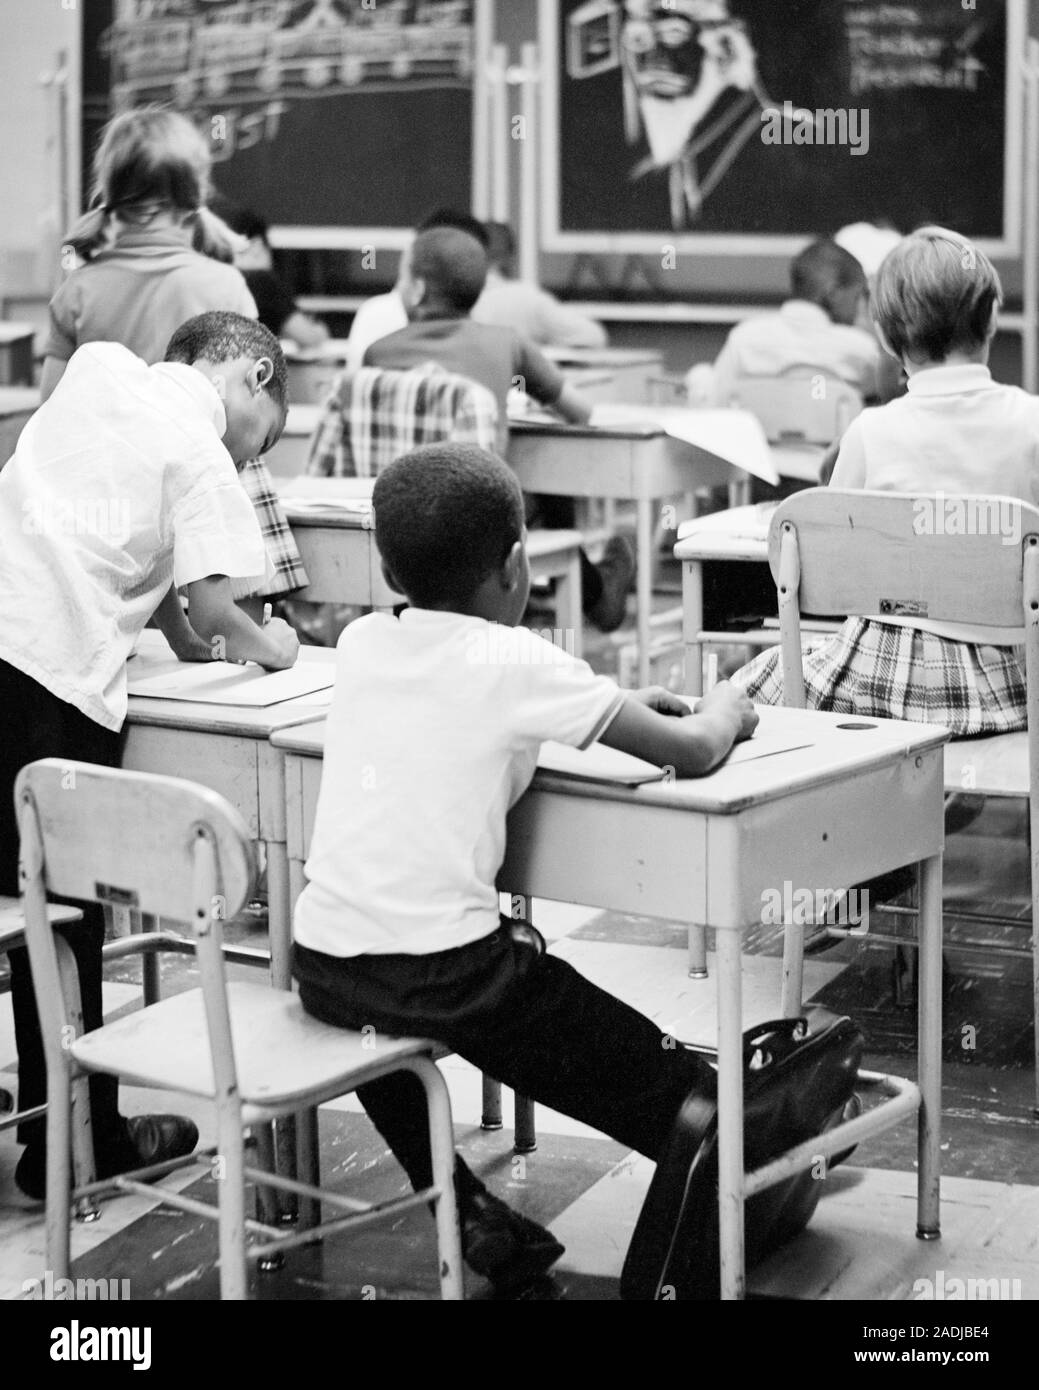 1960s 1970s BACK VIEW OF AFRICAN-AMERICAN AND CAUCASIAN STUDENTS IN MIDDLE SCHOOL CLASSROOM, - s17243 HAR001 HARS COPY SPACE FRIENDSHIP HALF-LENGTH INSPIRATION MALES B&W DESKS GOALS SCHOOLS SUCCESS DREAMS GRADE AFRICAN-AMERICANS AFRICAN-AMERICAN AND KNOWLEDGE BLACK ETHNICITY ACADEMIC INTEGRATED OPPORTUNITY PRIMARY INSTRUCTION VARIOUS ANONYMOUS VARIED GRADE SCHOOL GROWTH JUVENILES PUBLIC SCHOOL TOGETHERNESS BLACK AND WHITE CAUCASIAN ETHNICITY HAR001 OLD FASHIONED AFRICAN AMERICANS Stock Photo